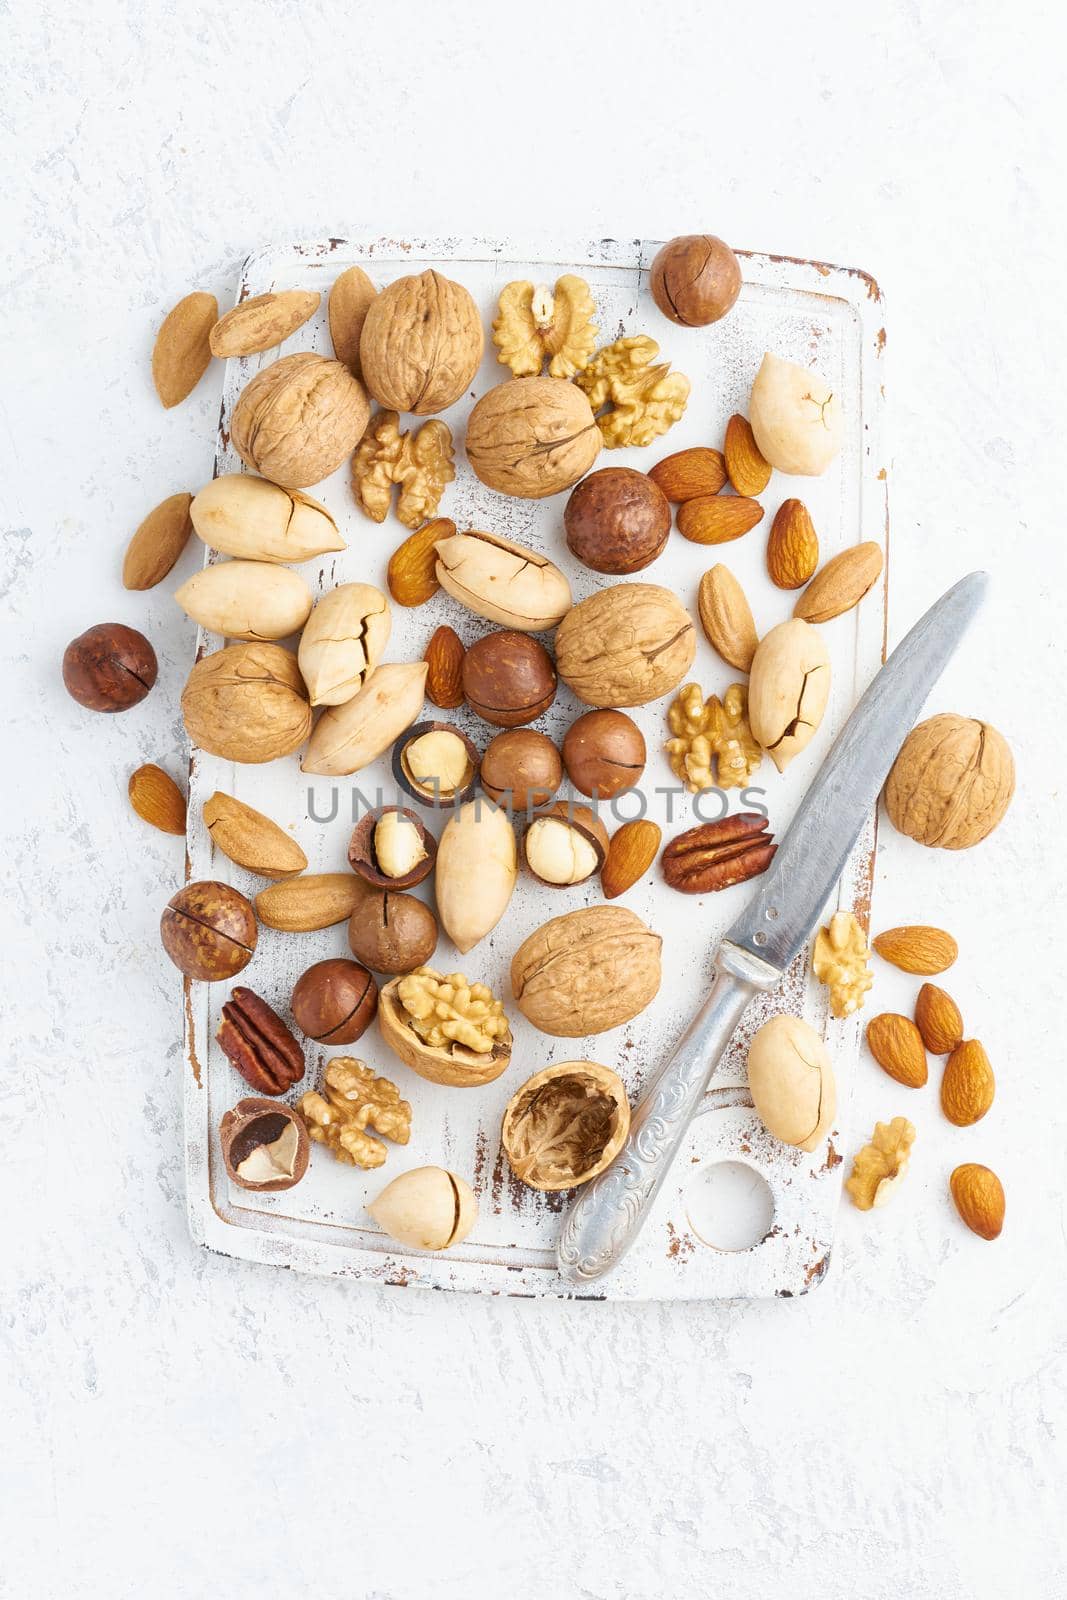 Mix of nuts - walnut, almonds, pecans, macadamia and knife for opening shell on a white wooden cutting board. Healthy vegan food. Clean eating, balanced diet. Top view, macro, close up